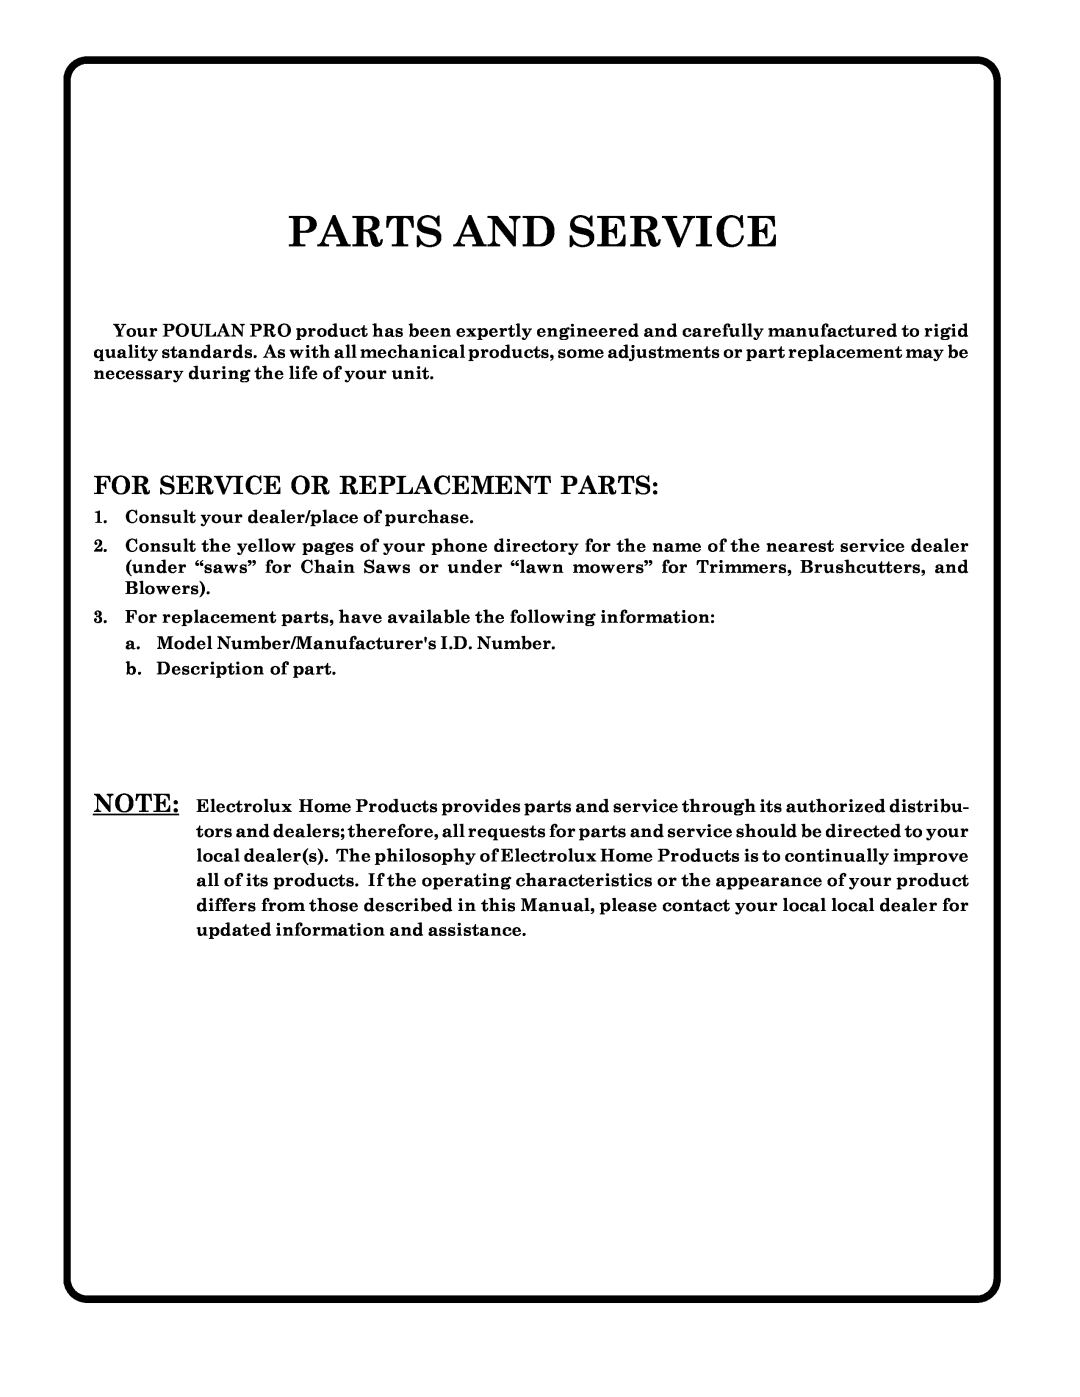 Poulan 180200 owner manual Parts And Service, For Service Or Replacement Parts 